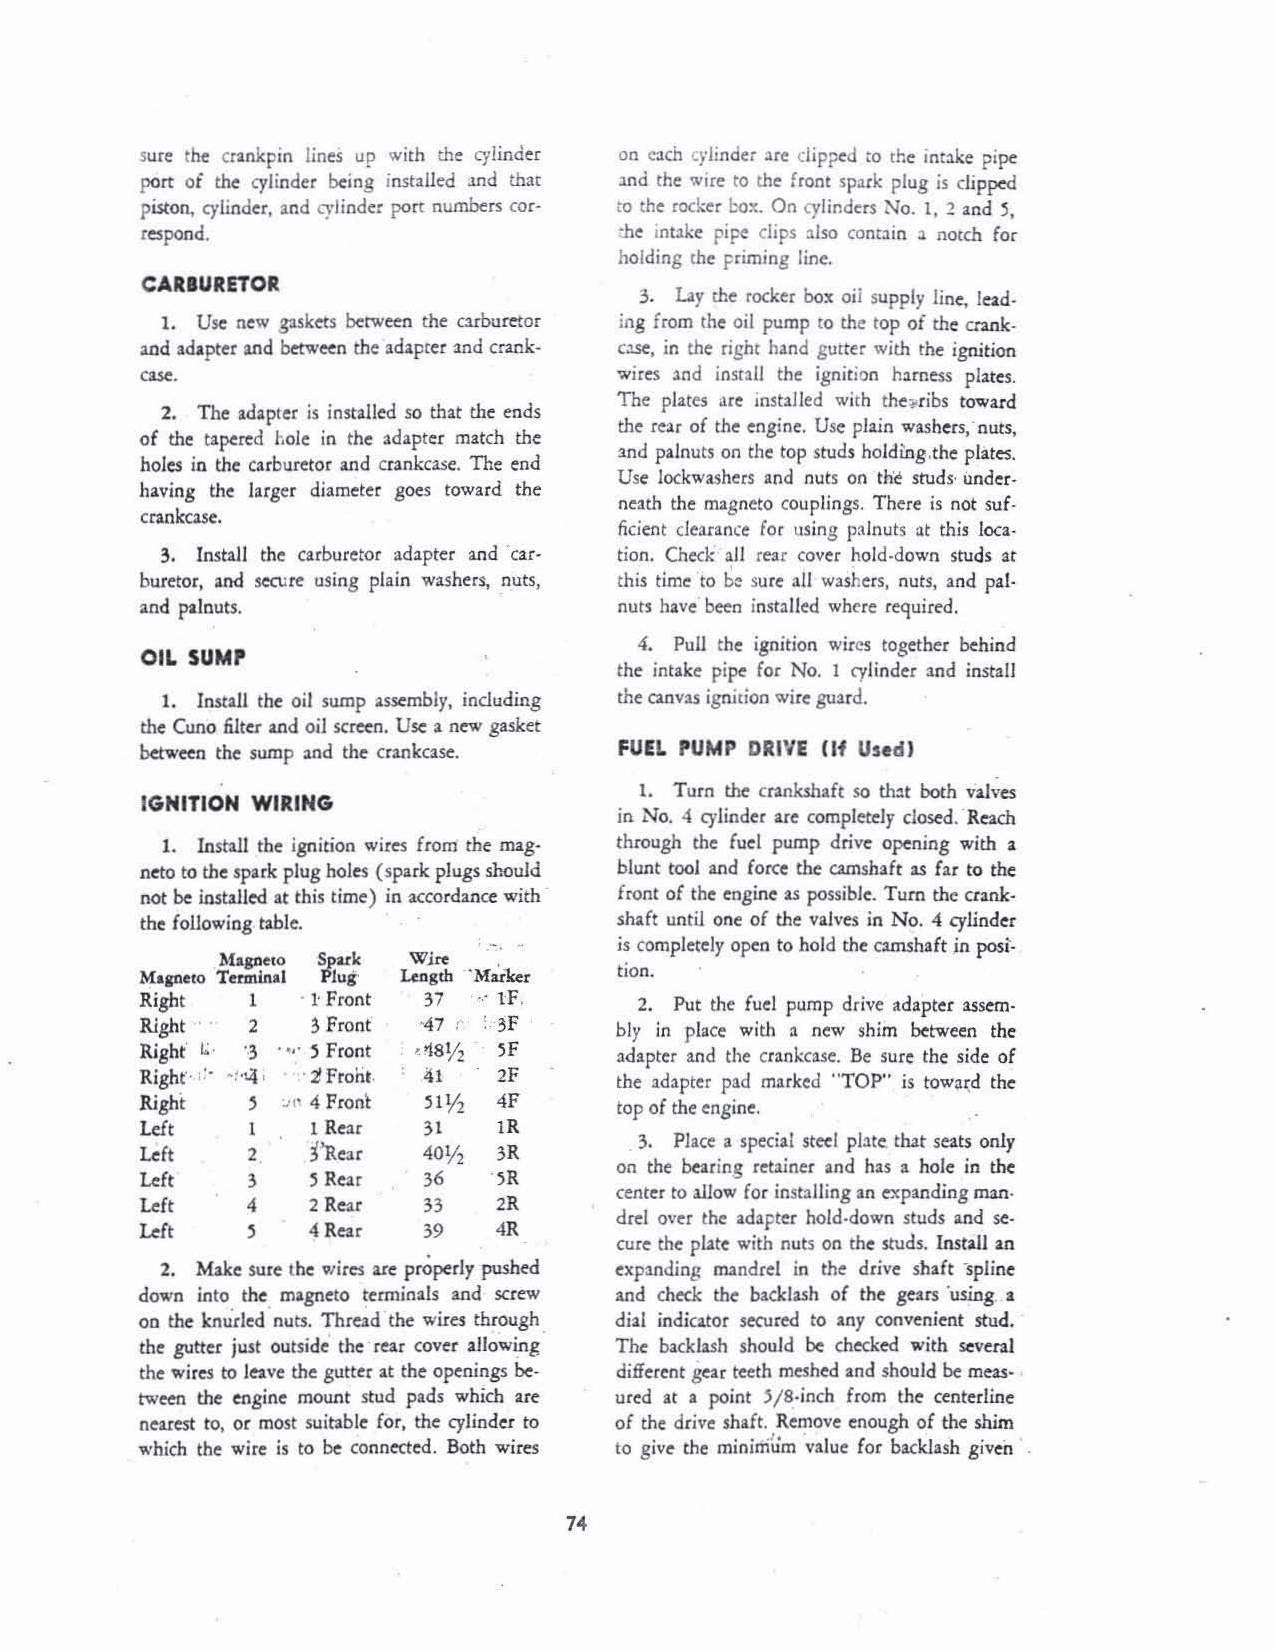 Sample page 72 from AirCorps Library document: Operation, Maintenance and Overhaul Manual - R-56 Kinner Engine